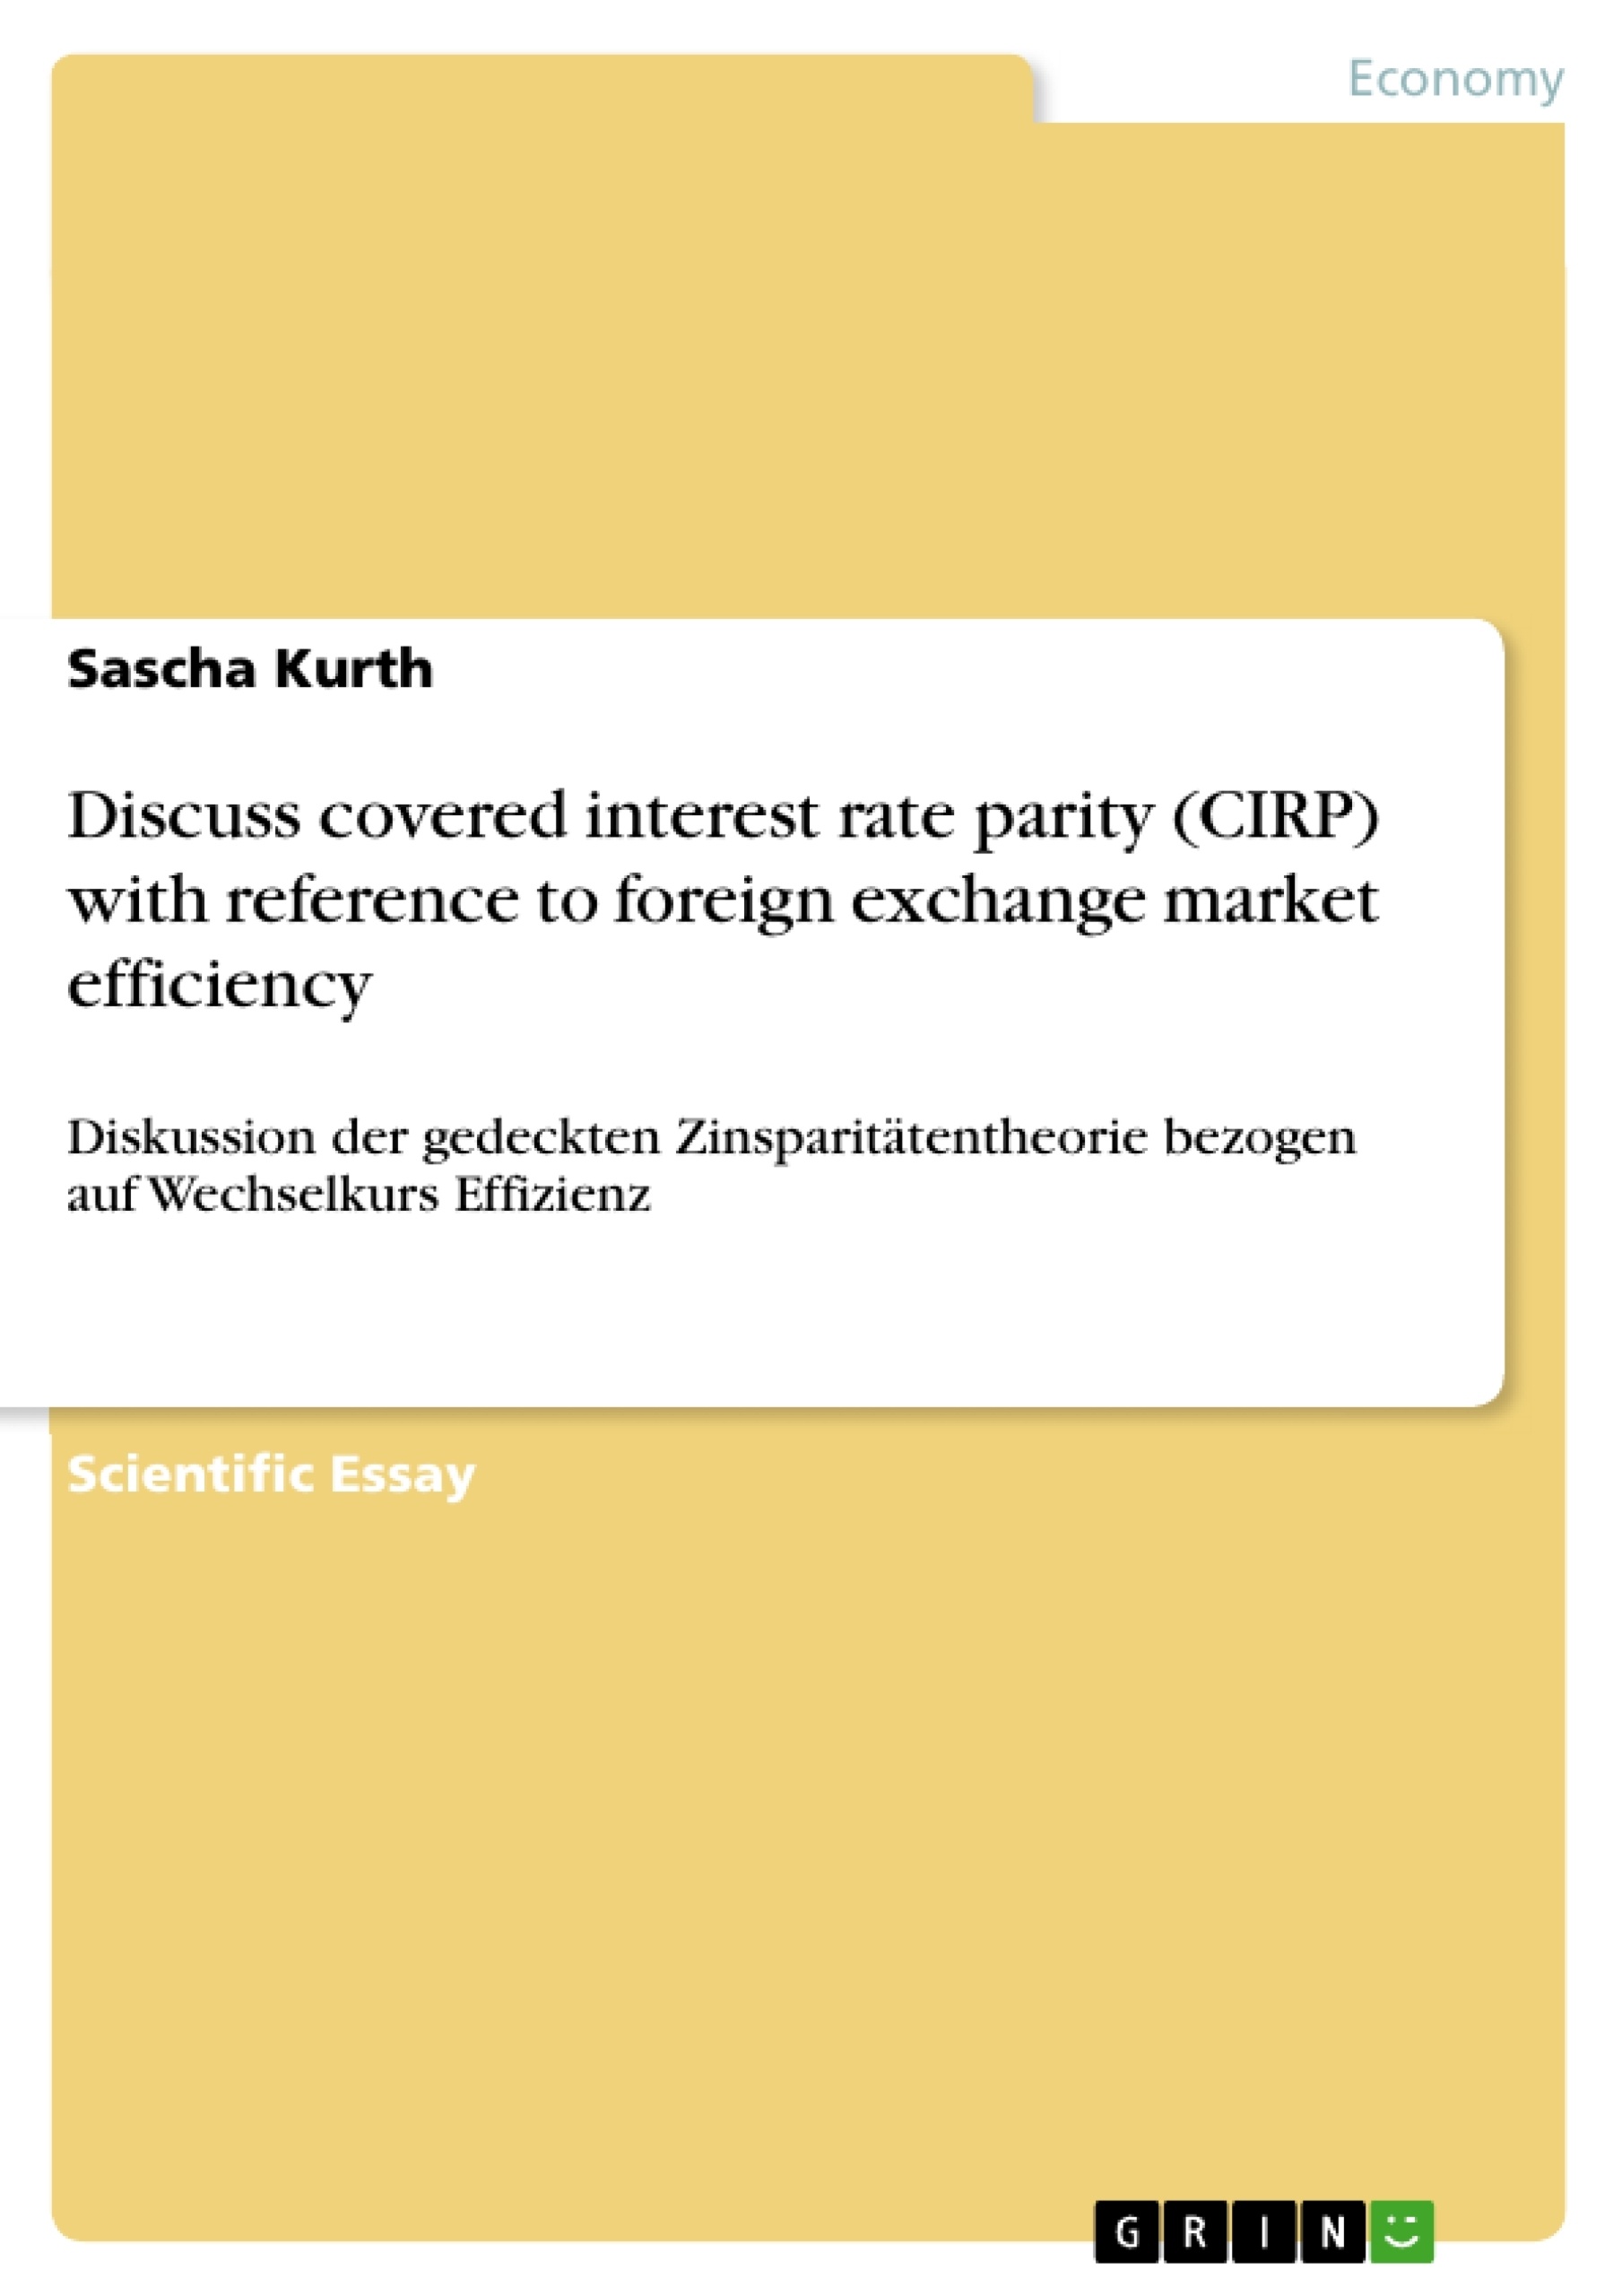 Título: Discuss covered interest rate parity (CIRP) with reference to foreign exchange market efficiency